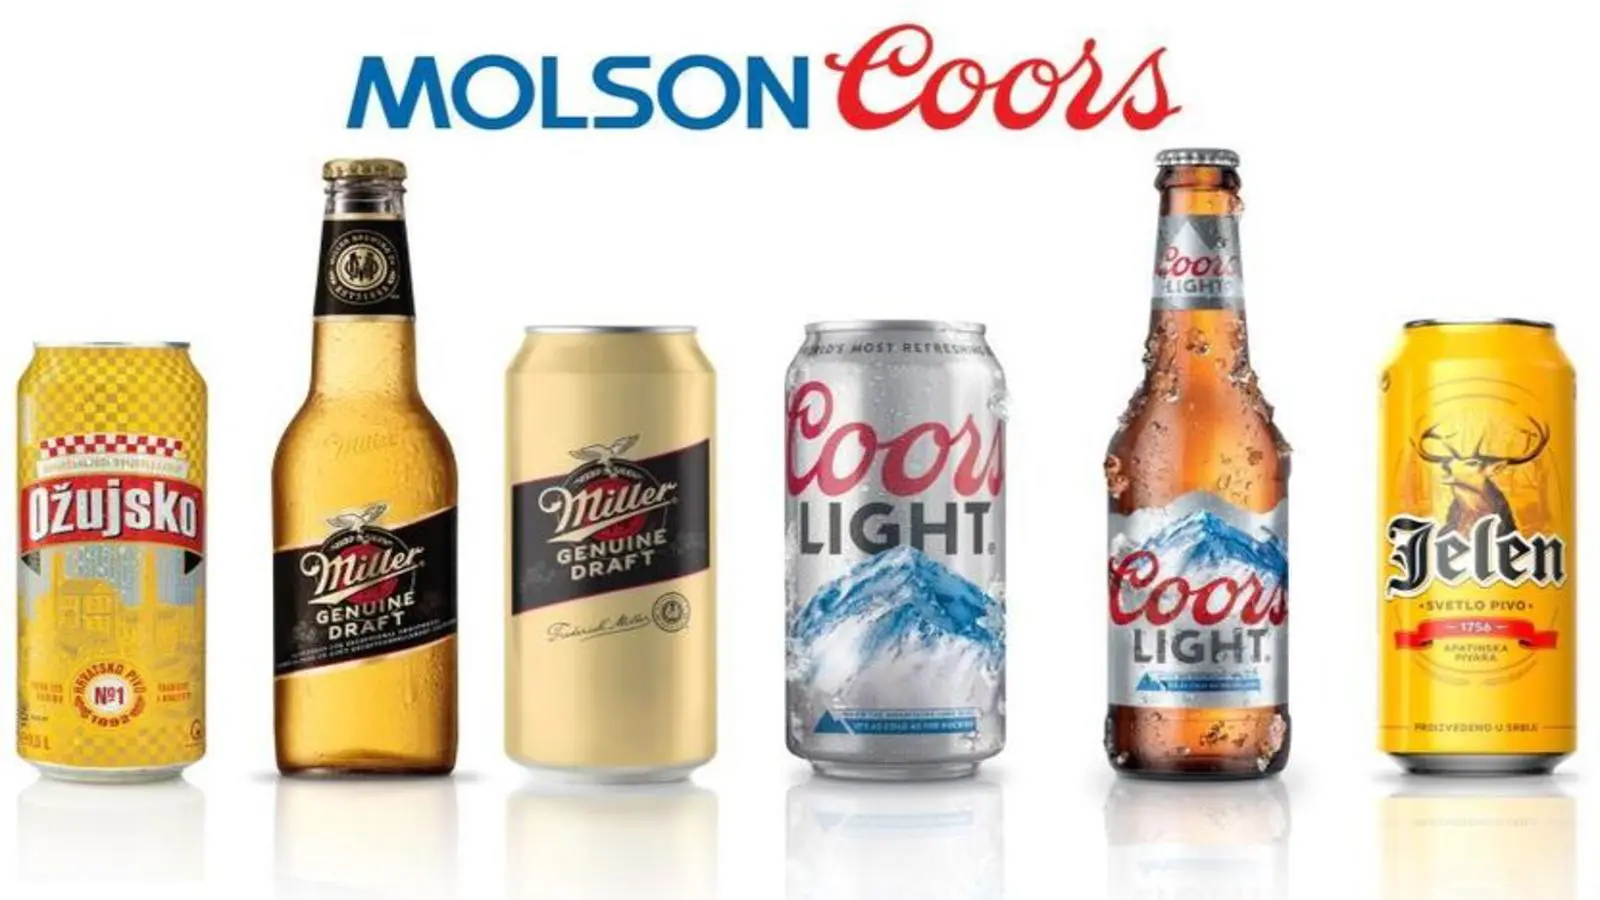 Molson Coors posts 4% growth in Q3 net sales, positive net pricing and favorable sales mix drive growth